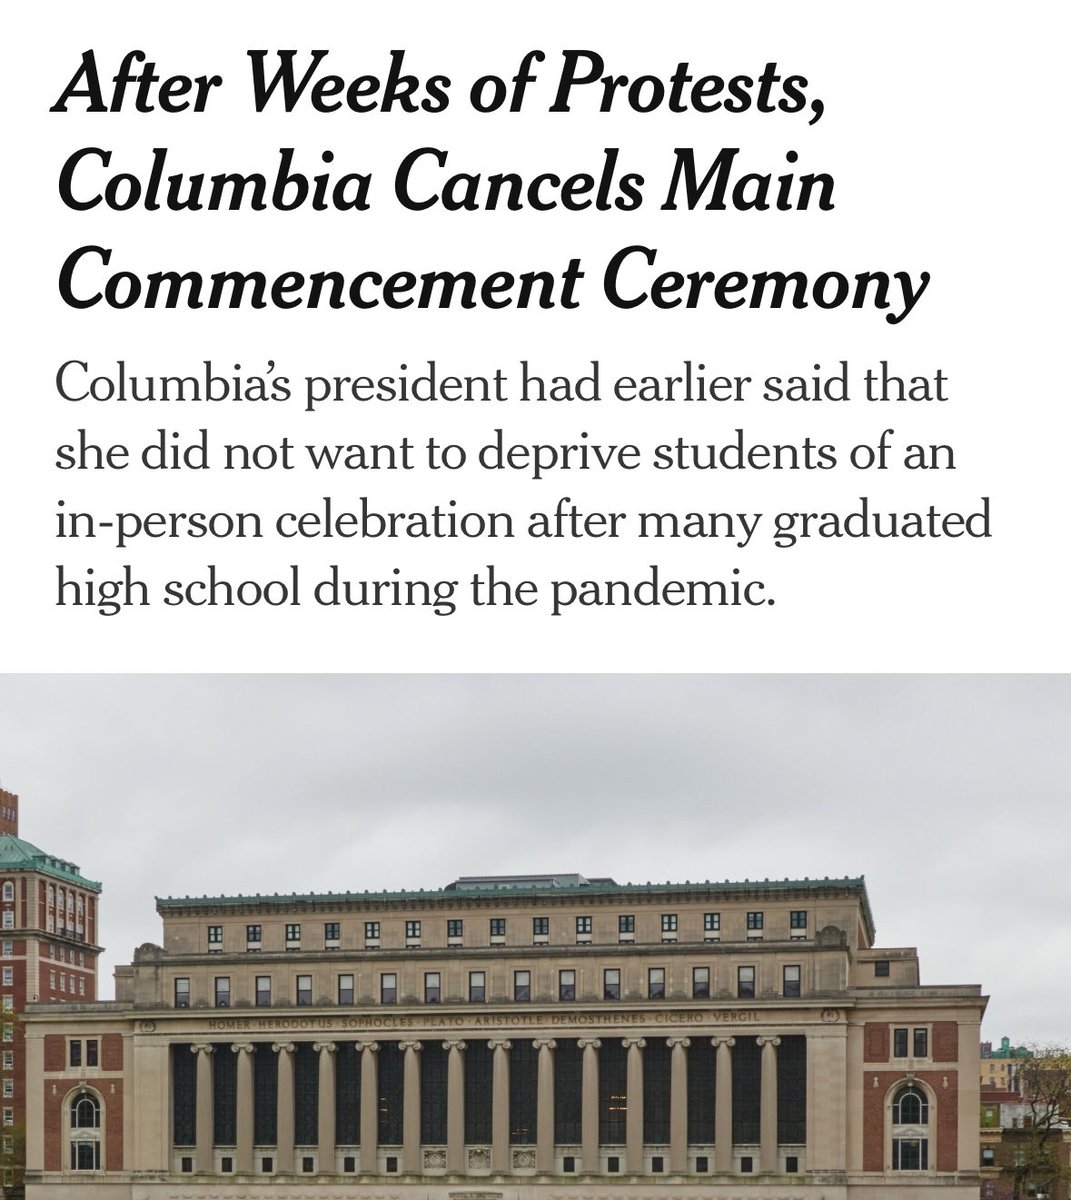 BREAKING: After using riot police to invade campus and arrest 200 of its own students protesting Israel's mass killings in Gaza, ⁦@Columbia⁩ University just canceled its main graduation ceremony anyway. Big mistake and a stunning sign of institutional failure.⤵️